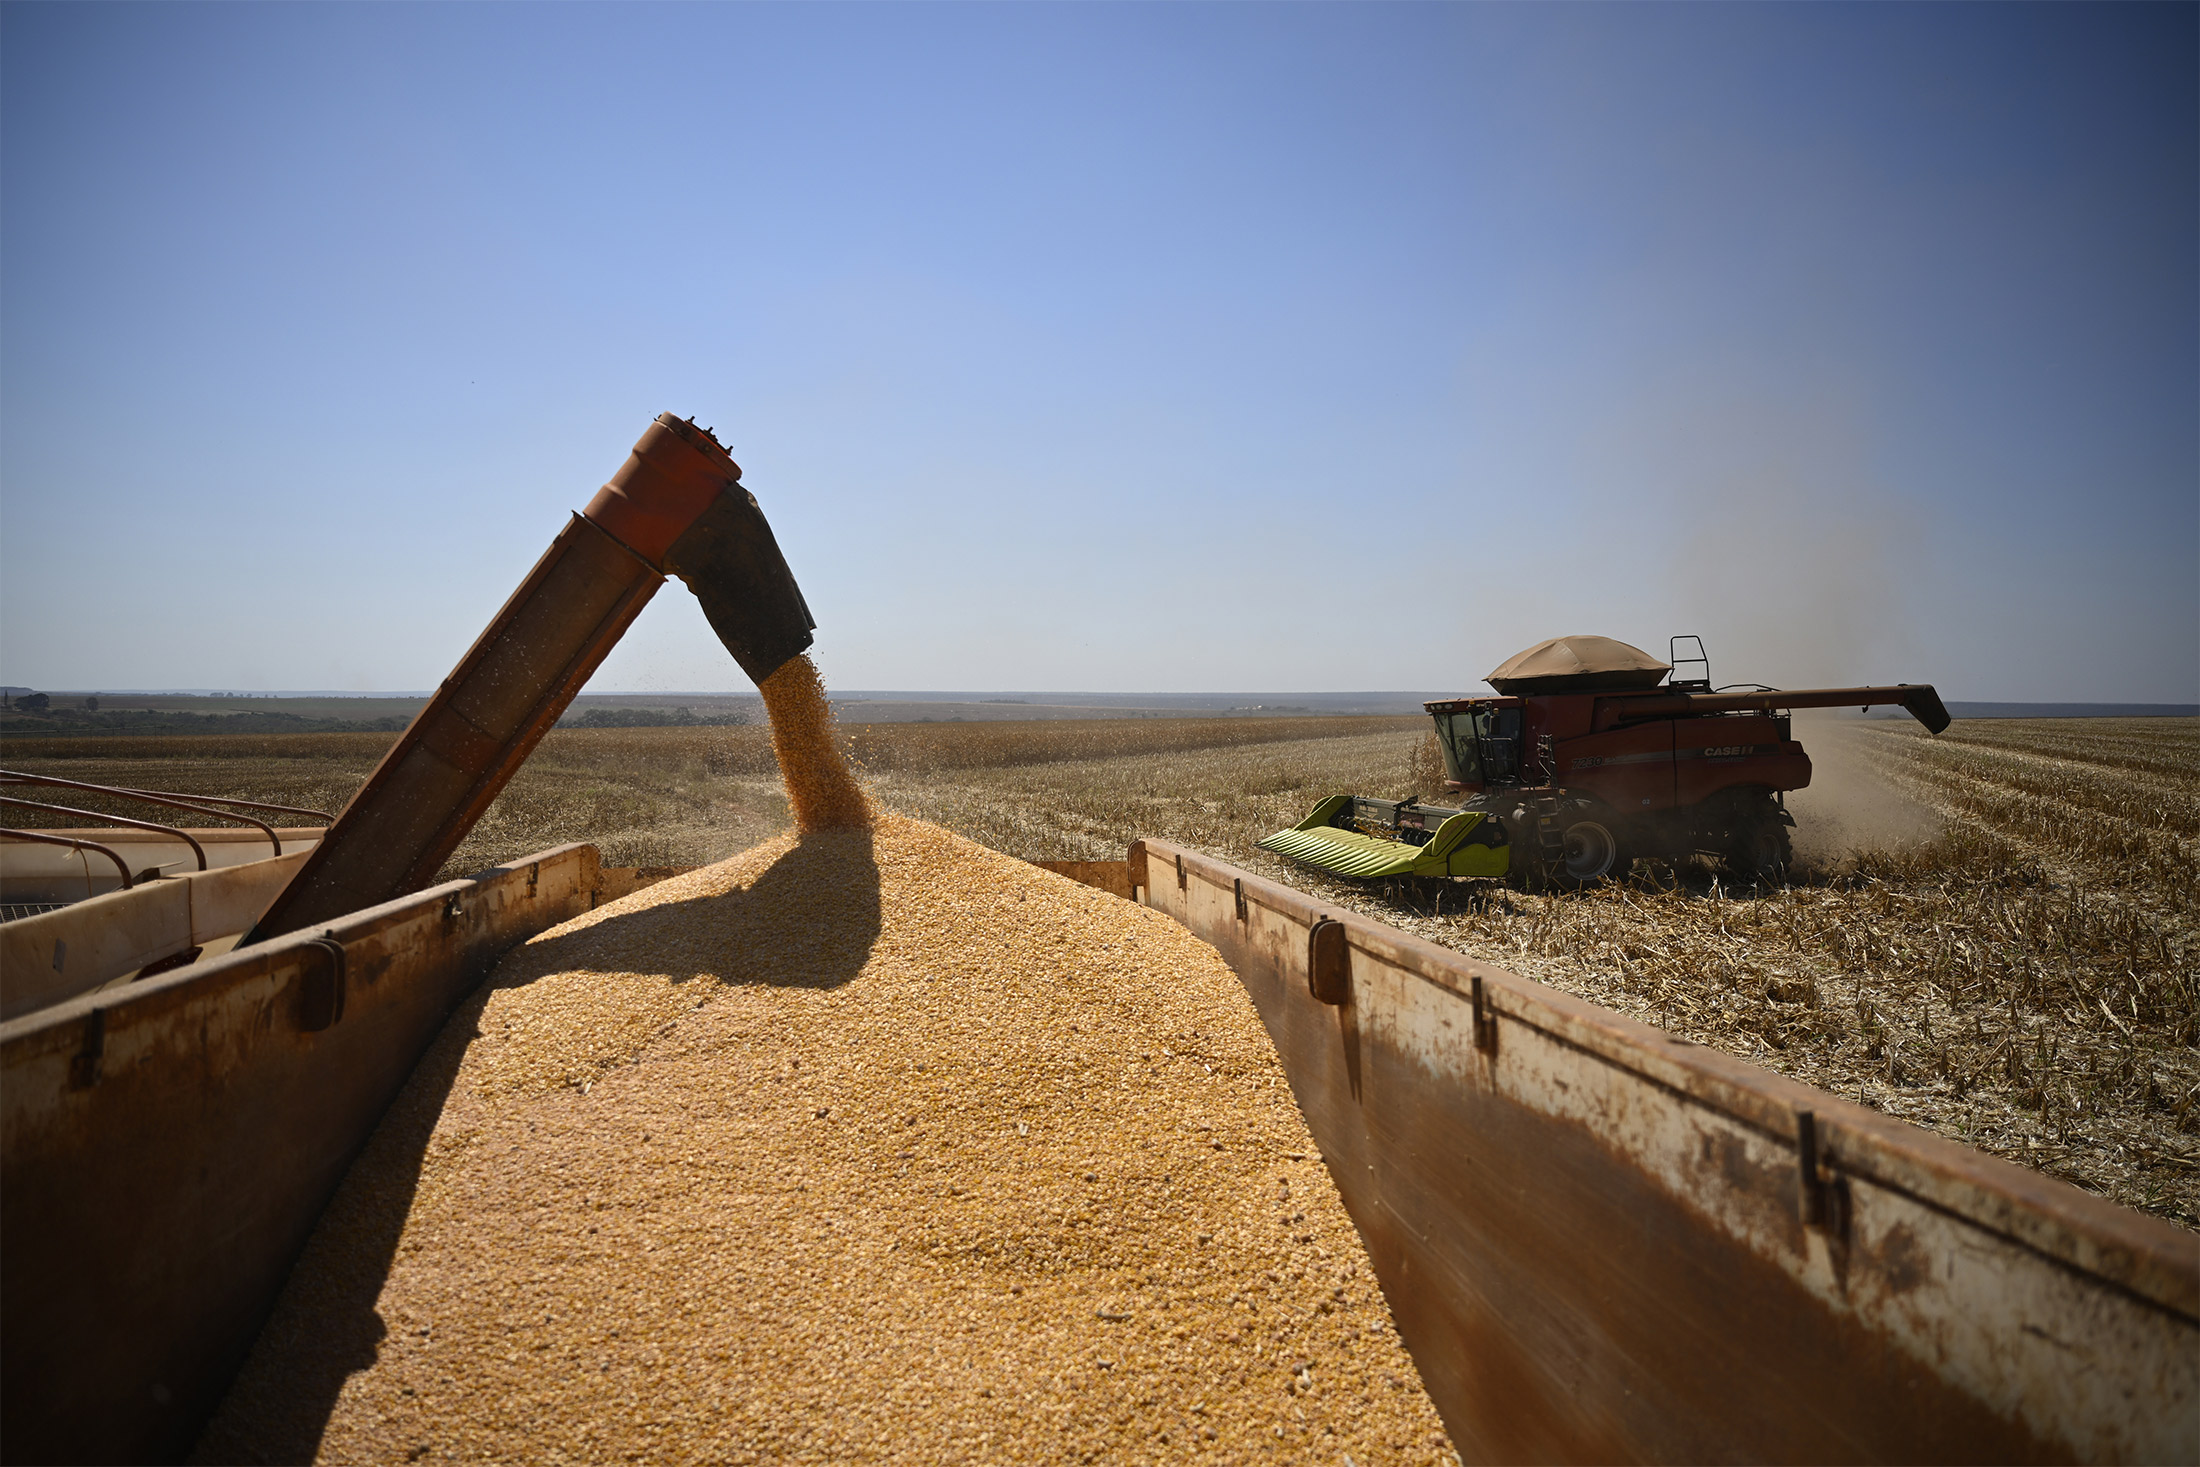 Clarice Couto on LinkedIn: Dry Weather in Key Crop Shipper Brazil